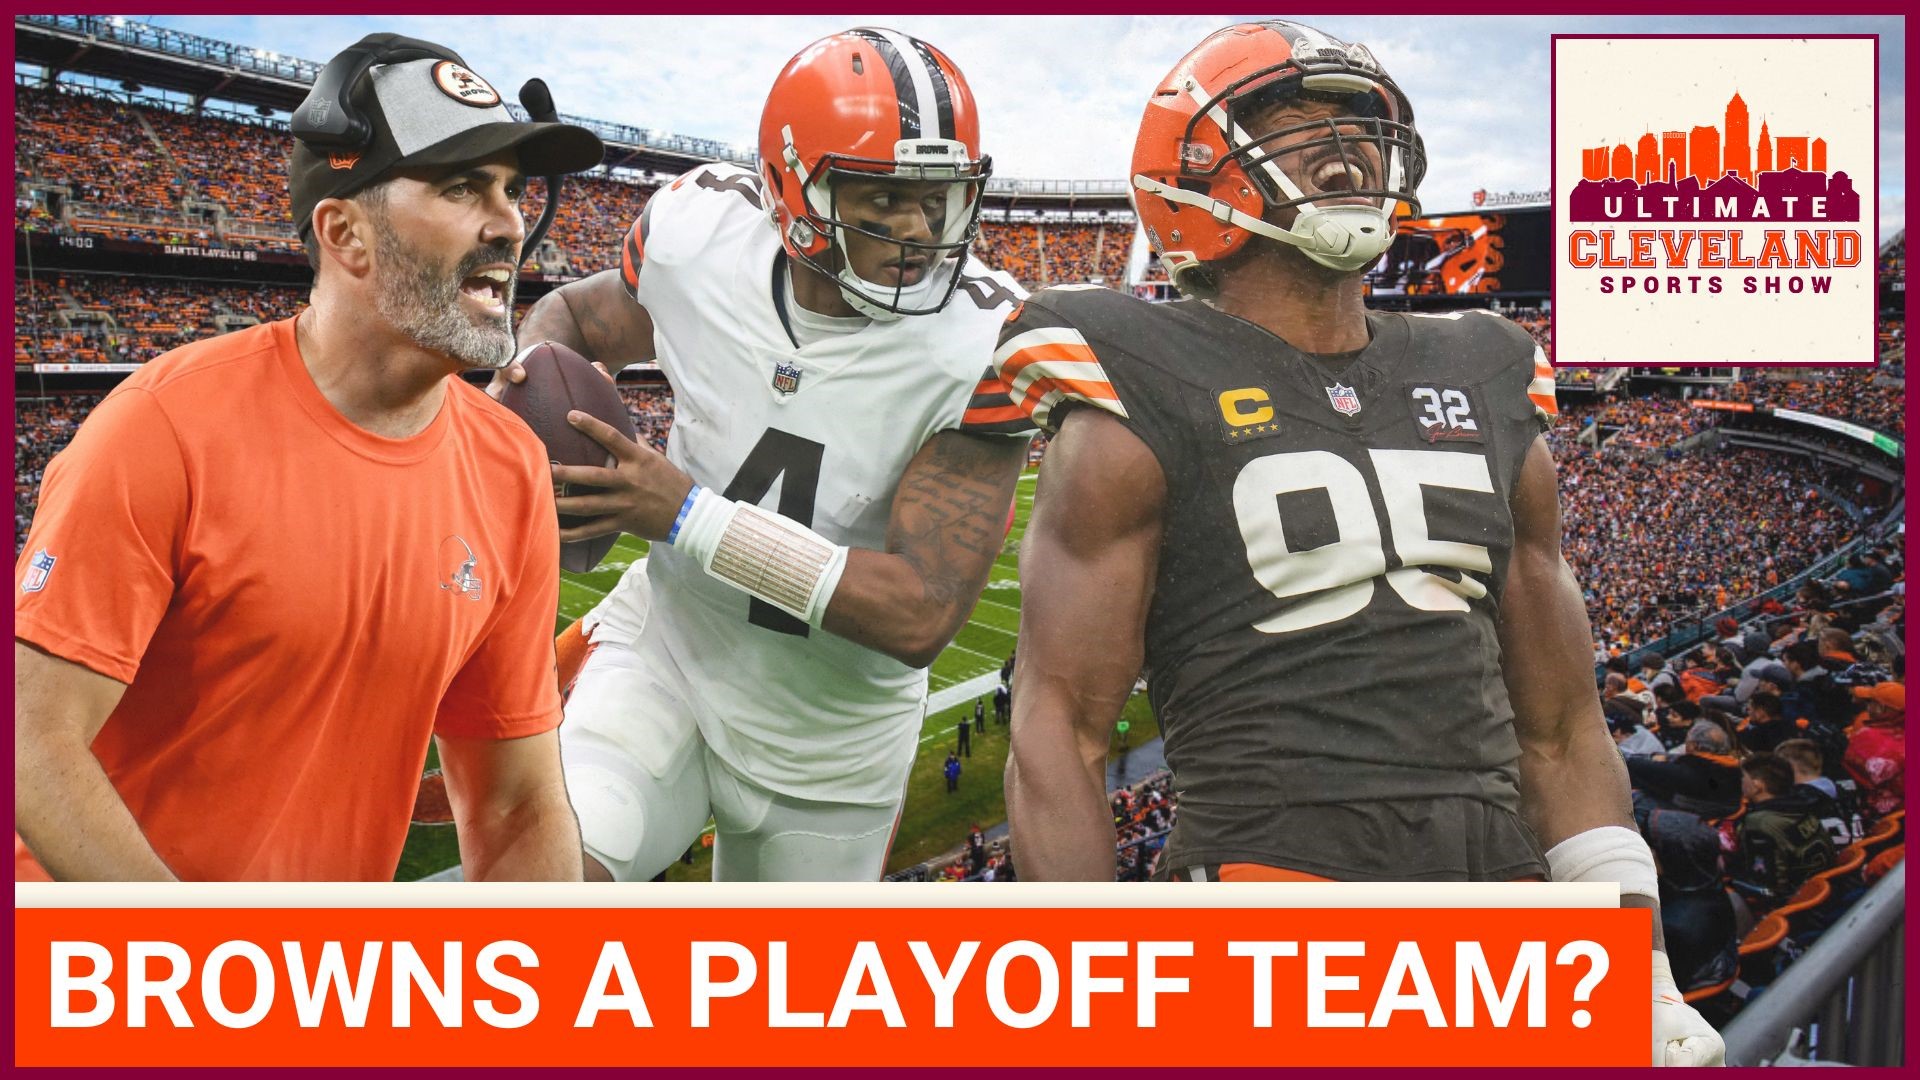 FanDuel gives their latest odds on the Cleveland Browns playoff chances